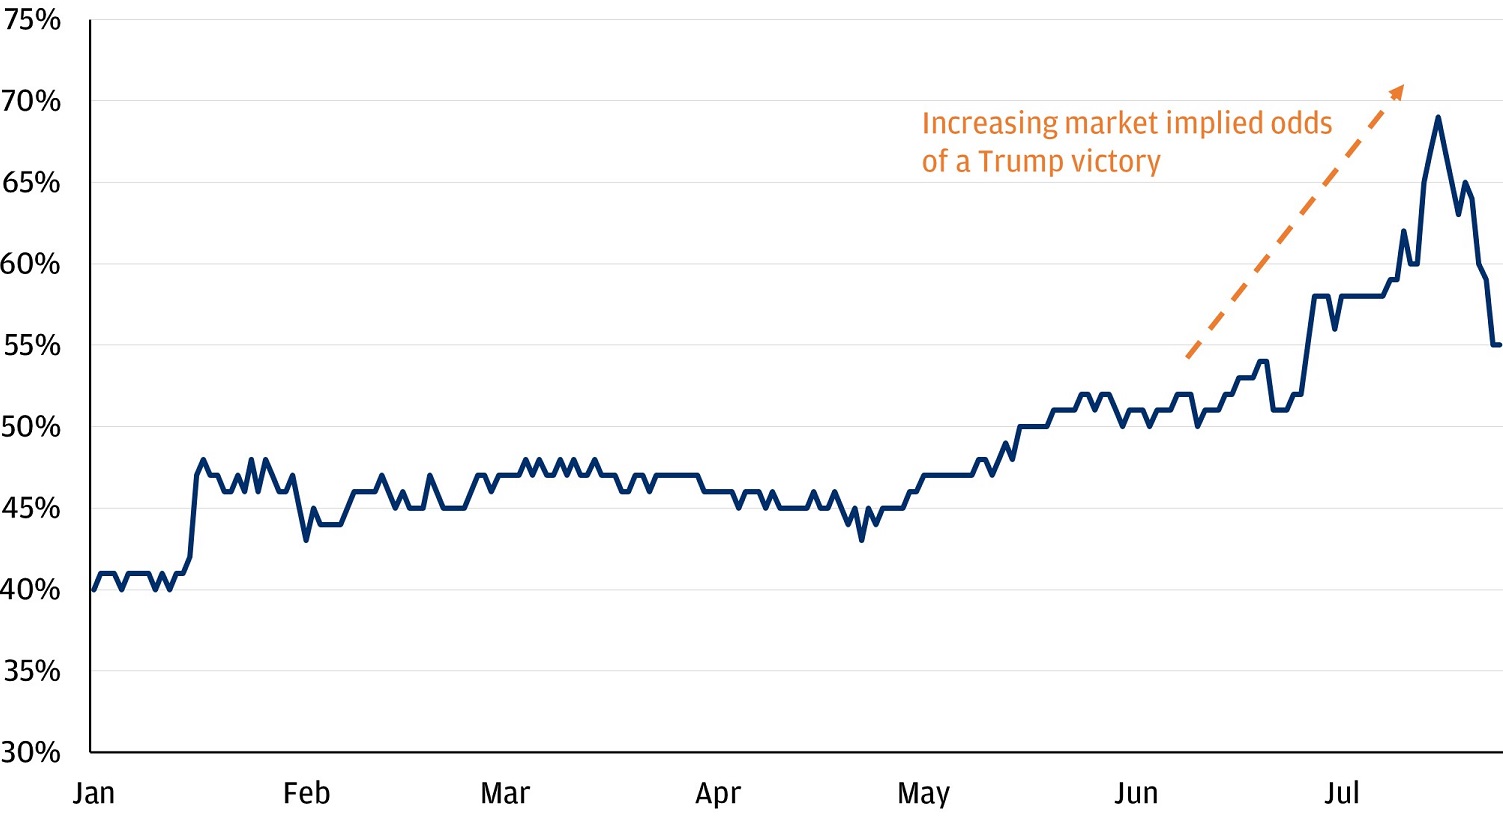 This chart shows the betting odds for a Trump victory in the 2024 Presidential election from January 2024 to the present. In January, the odds were at 40. By May, they had risen to 50 after a long period of plateauing. They rose throughout June to end the month at 56. The odds spiked in July, reaching a high of 69 before falling to their present value of 55 as of July 24th.